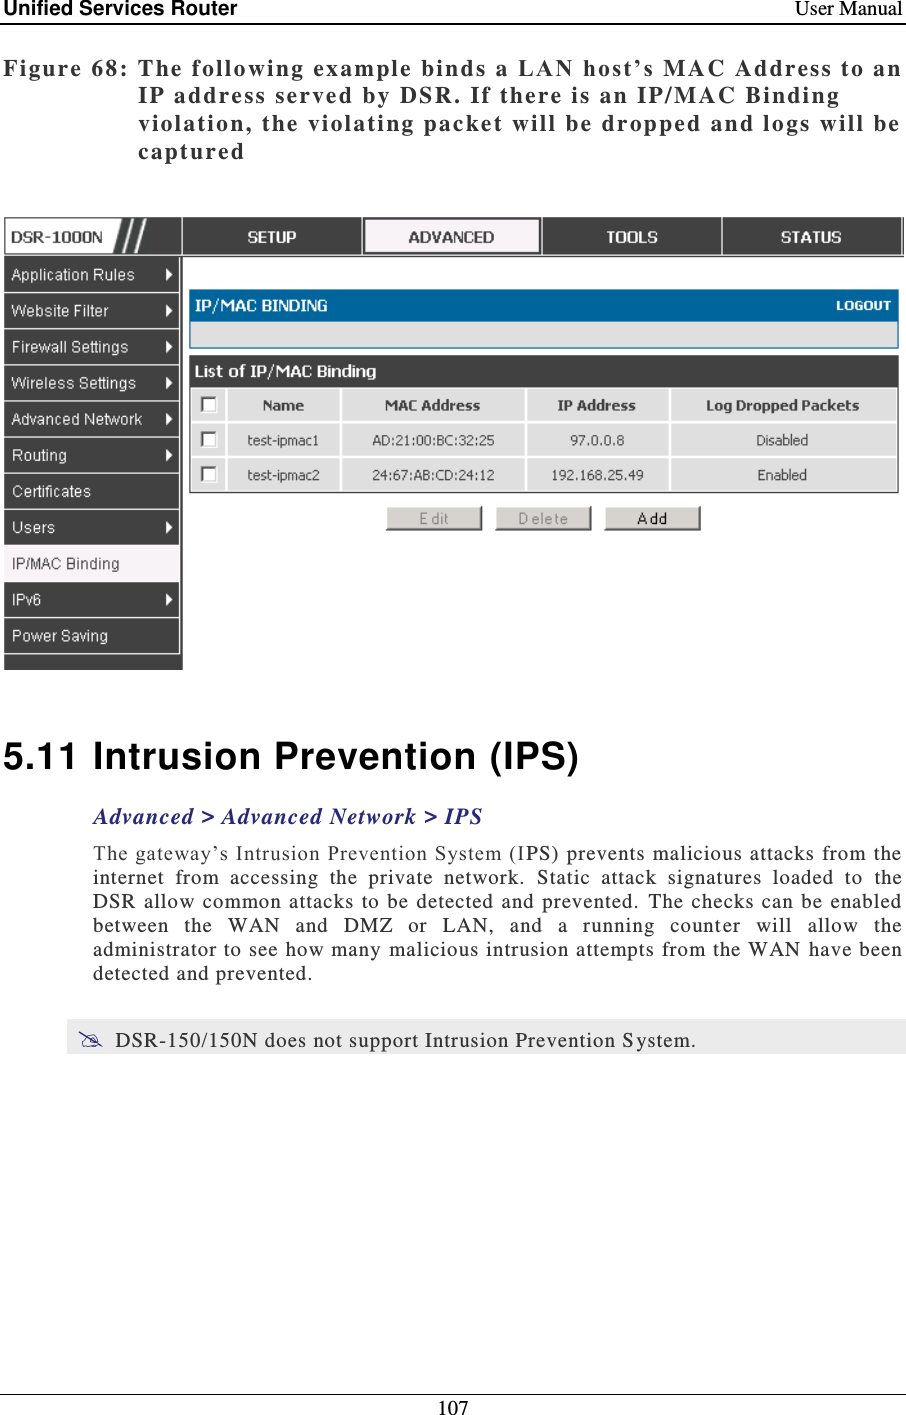 Unified Services Router    User Manual 107  Figure 68: The following example binds  a L A N  ho st’ s  MAC Address to an IP address served by DSR. If there is an IP/MAC Binding violation, the violati ng packet will be  dr opped and logs will be captured     5.11 Intrusion Prevention (IPS) Advanced &gt; Advanced Network &gt; IPS The gateway’s Intrusion Prevention System (I PS) prevents malicious attacks  from  the internet  from  accessing  the  private  network.   Static  attack  signatures  loaded  to  the DSR allow common  attacks to be  detected  and  prevented.   The checks  can be enabled between  the  WAN  and  DMZ  or  LAN,  and  a  running  counter  will  allow  the administrator to see how many  malicious intrusion attempts from the WAN have been detected and prevented.   DSR-150/150N does not support Intrusion Prevention S ystem.  